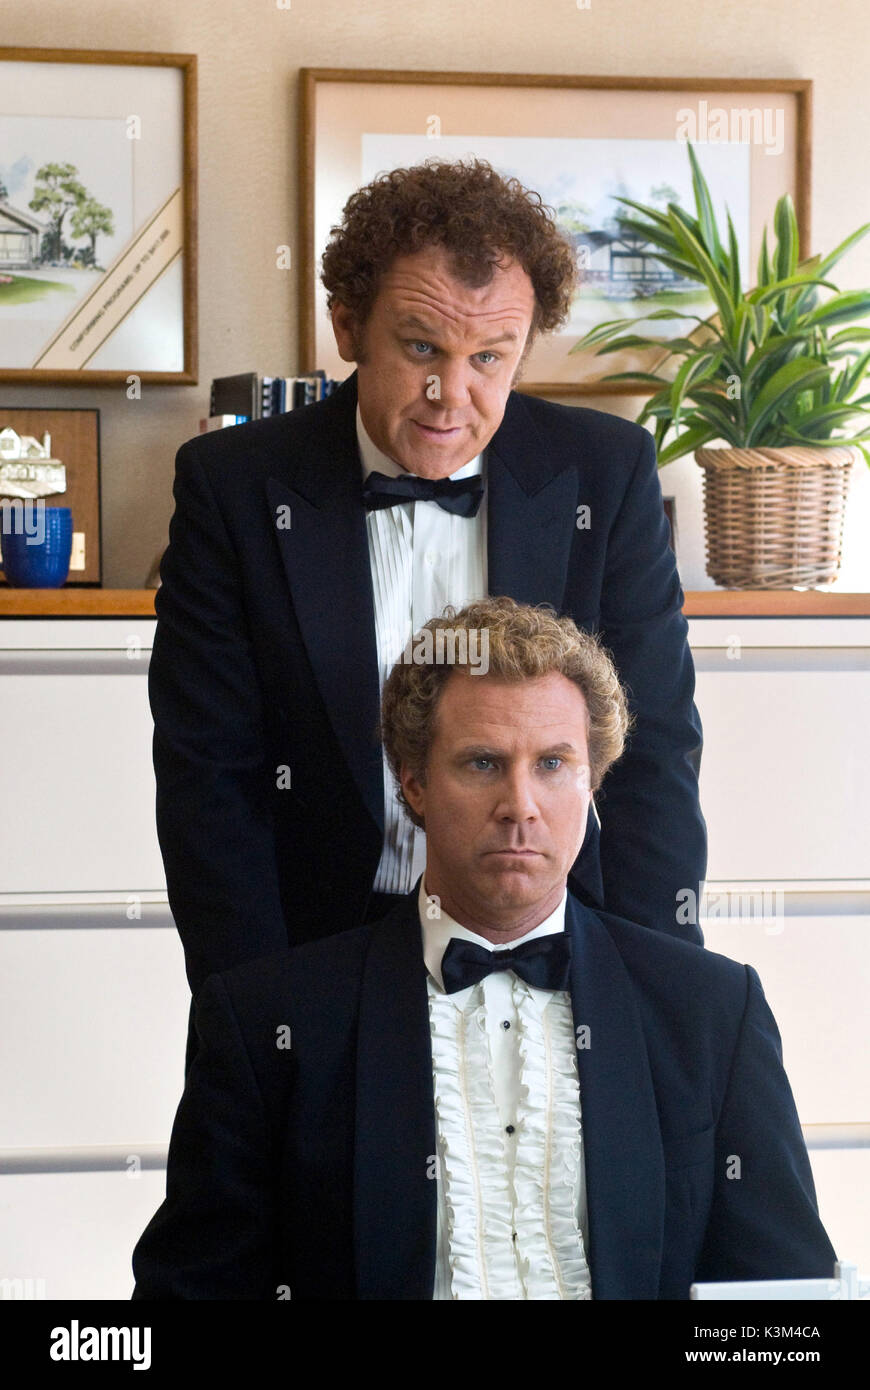 STEP BROTHERS JOHN C REILLY, WILL FERRELL STEP BROTHERS Date: 2008